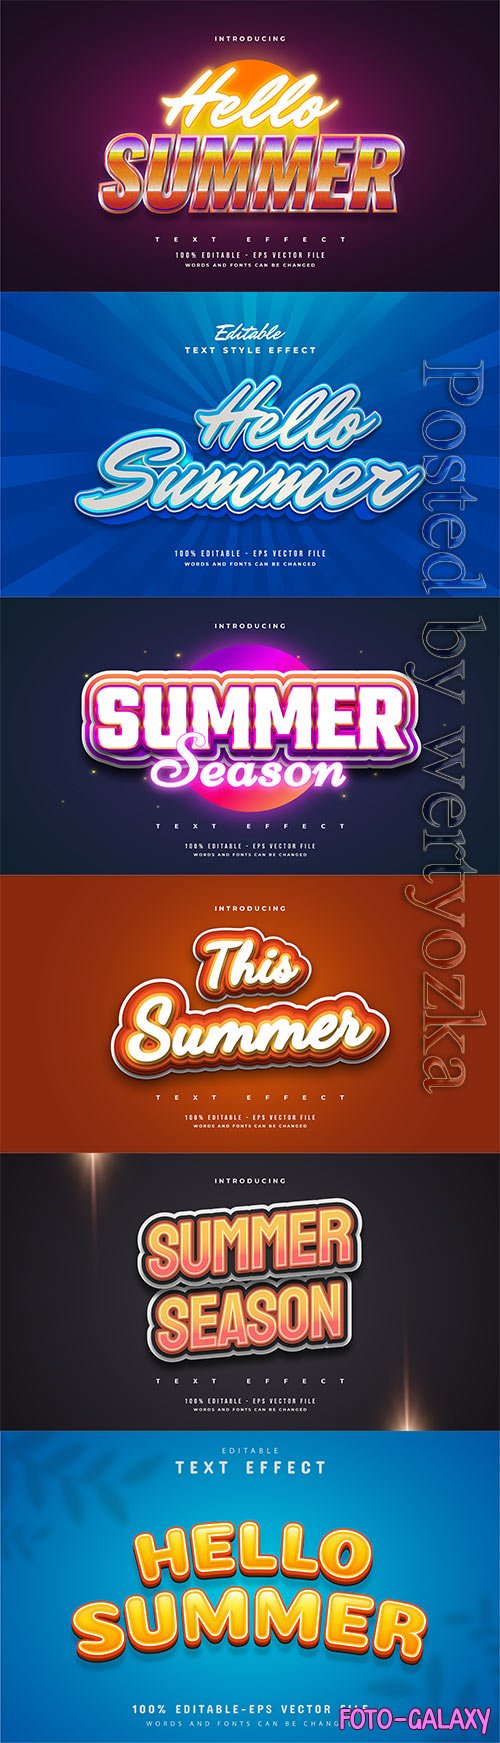 Summer season text in colorful style editable vector text effect